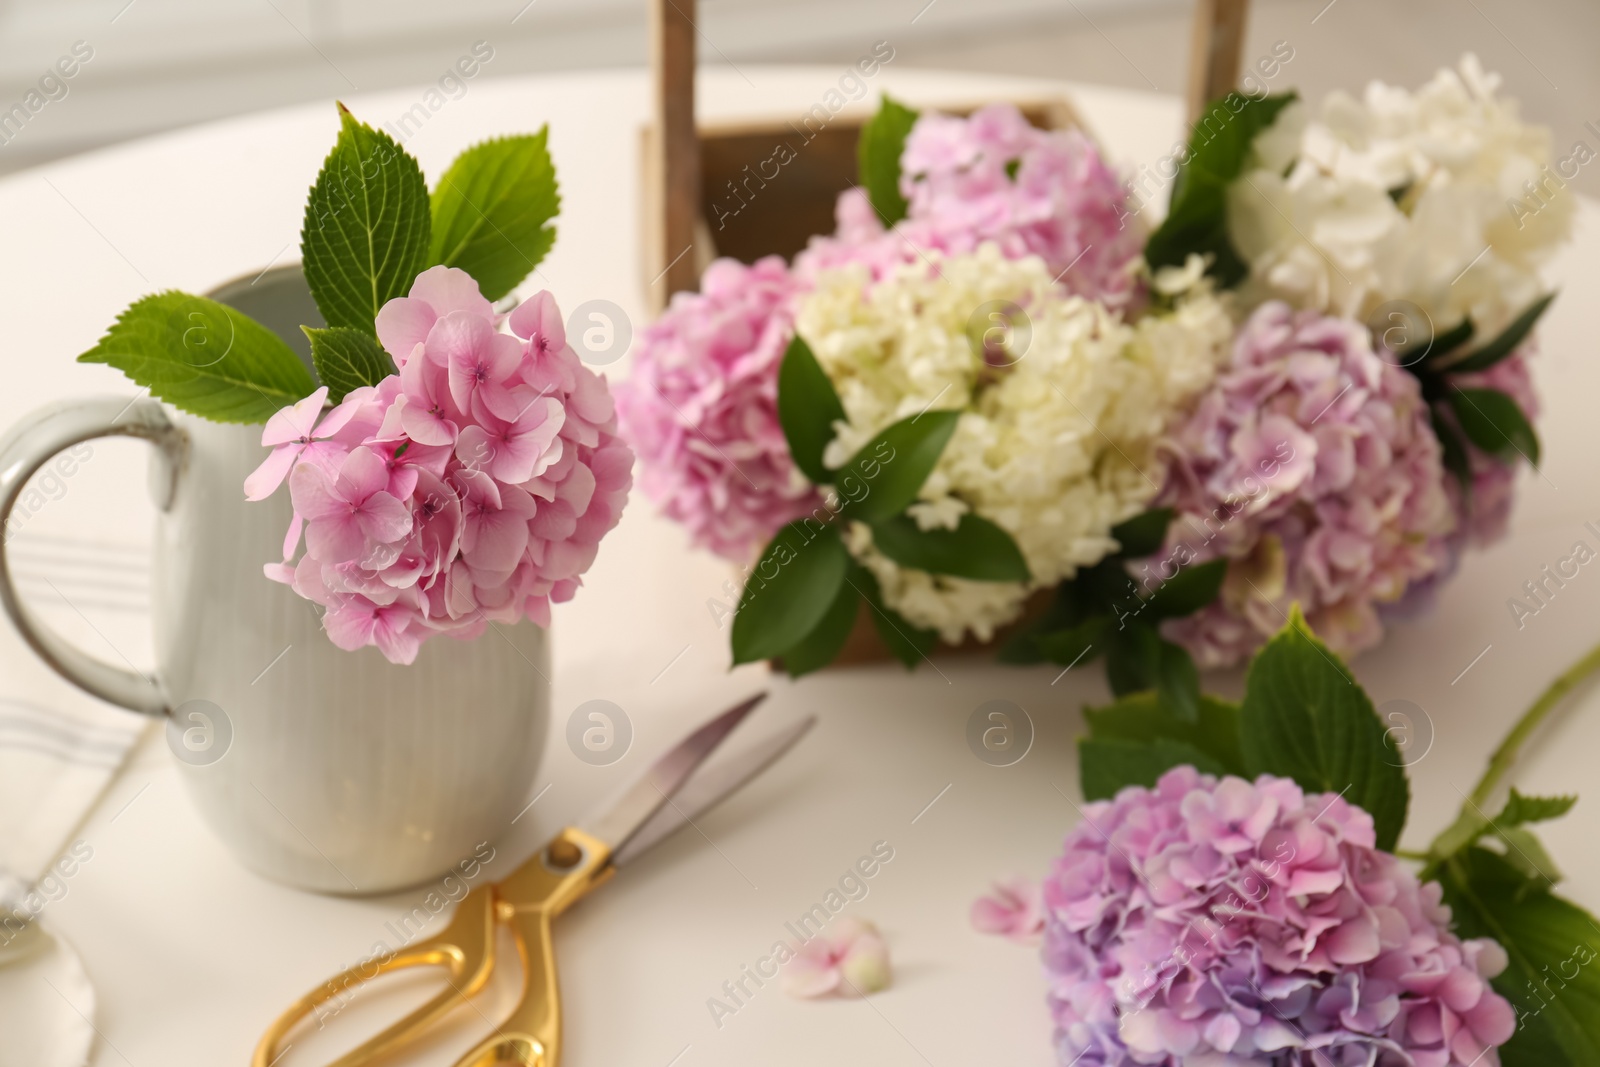 Photo of Beautiful hydrangea flowers and scissors on white table. Interior design element